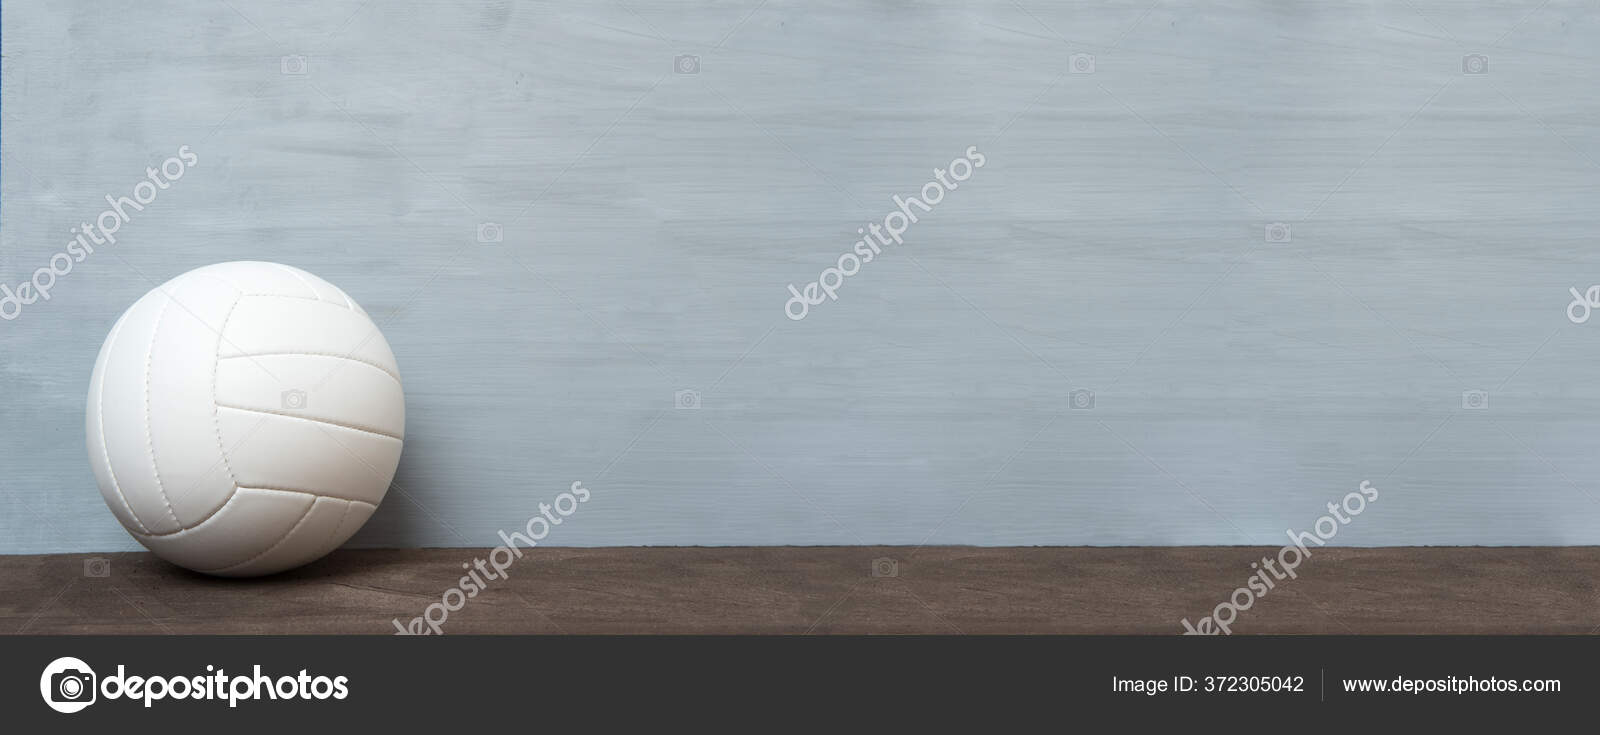 Close Volleyball Ball Grey Floor Online Workout Concept Stock Photo by ©sportoakimirka 372305042